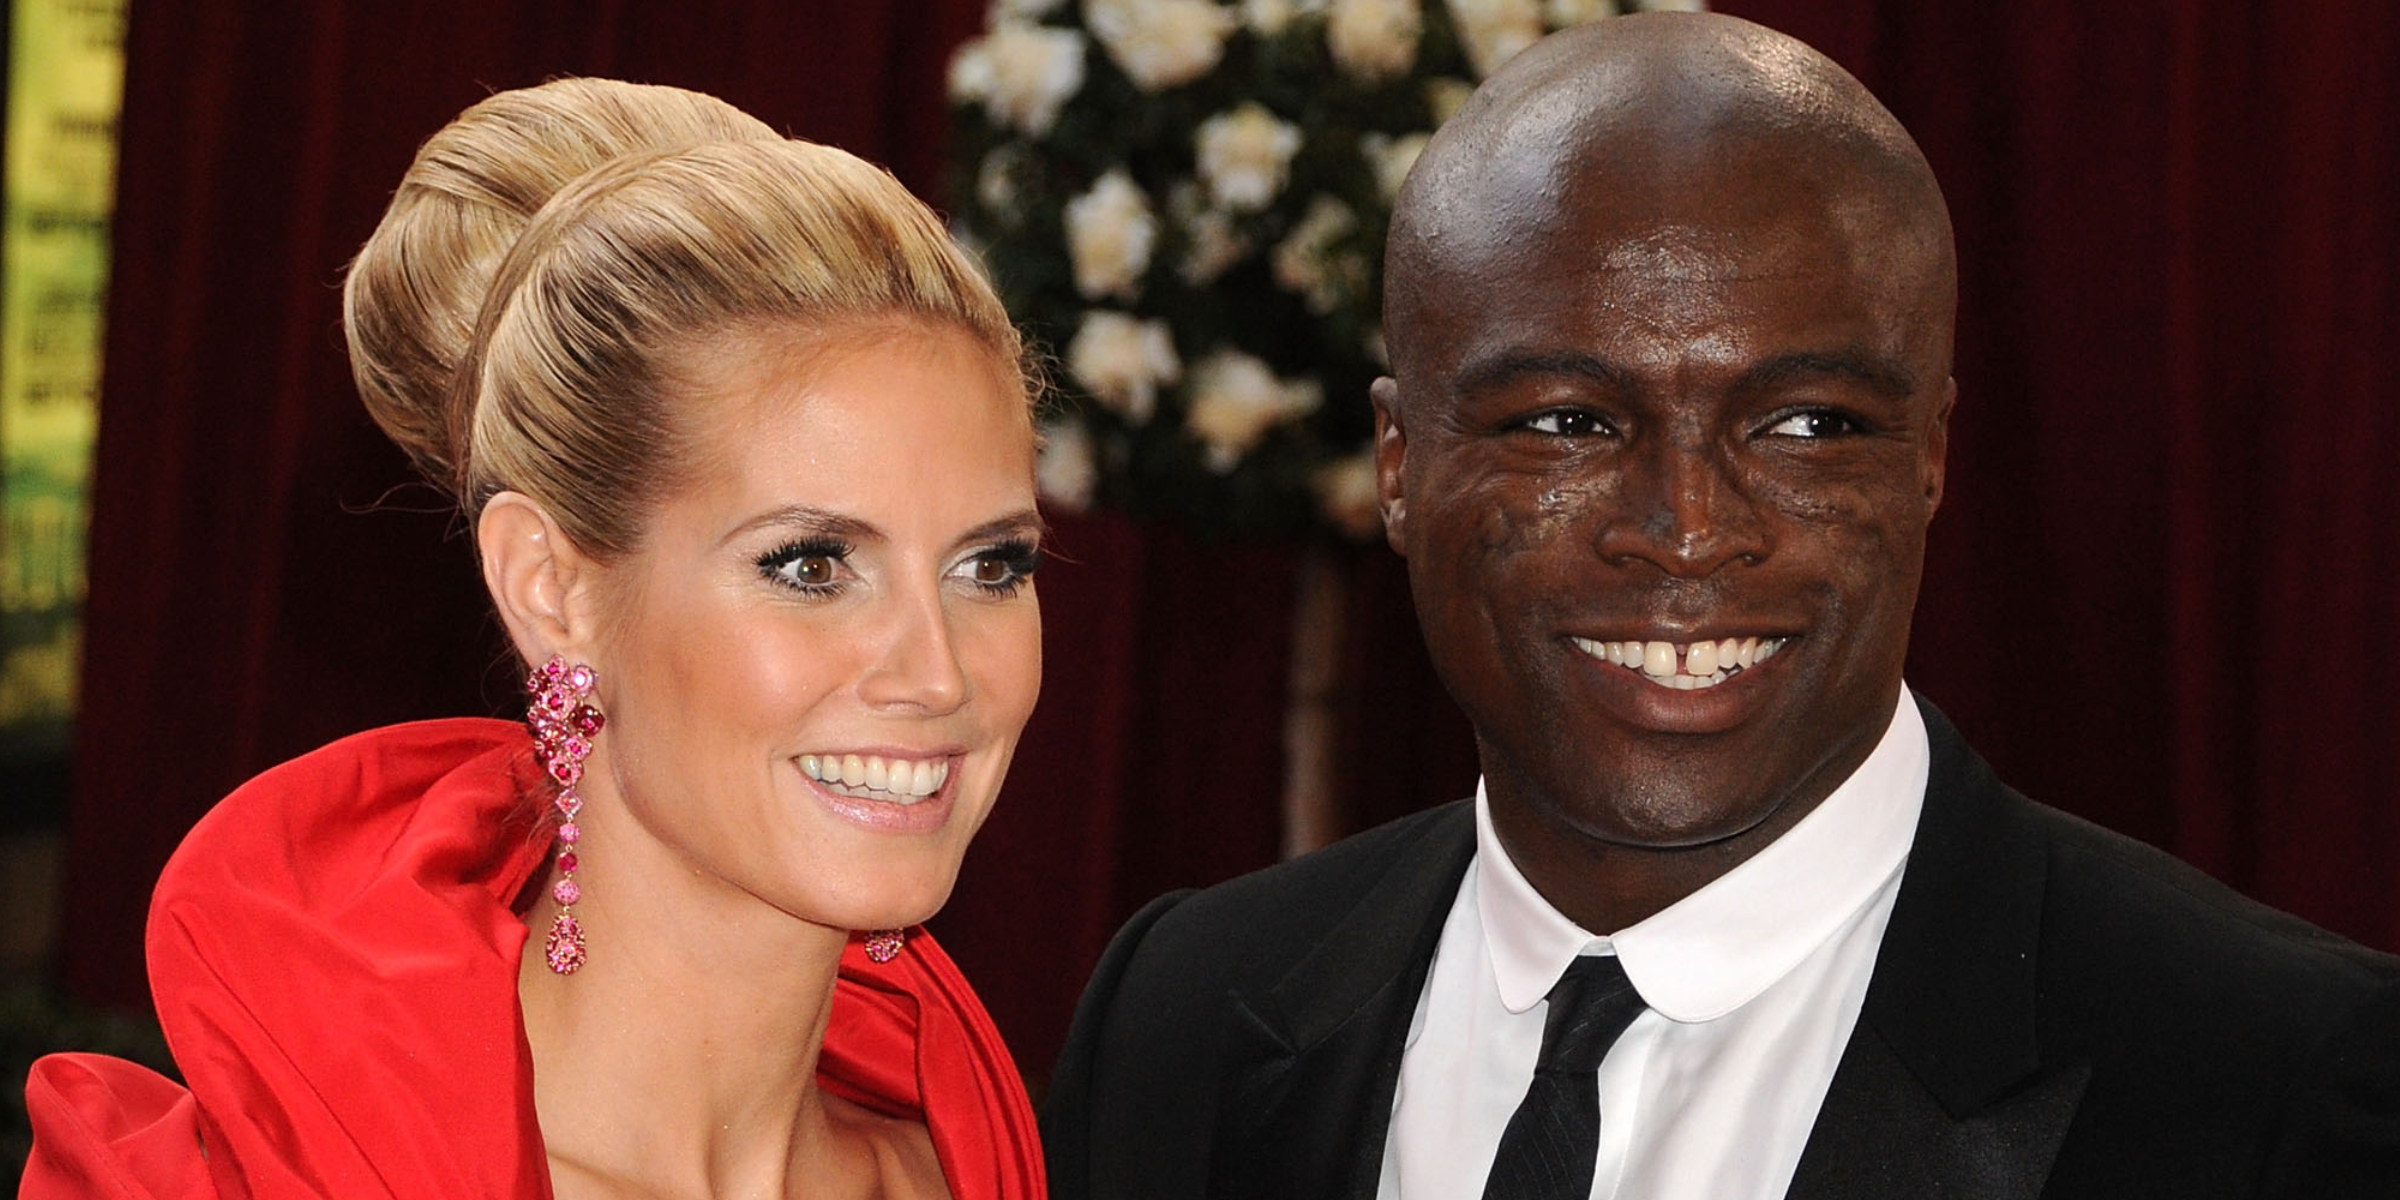 Heidi Klum and Seal | Source: Getty Images